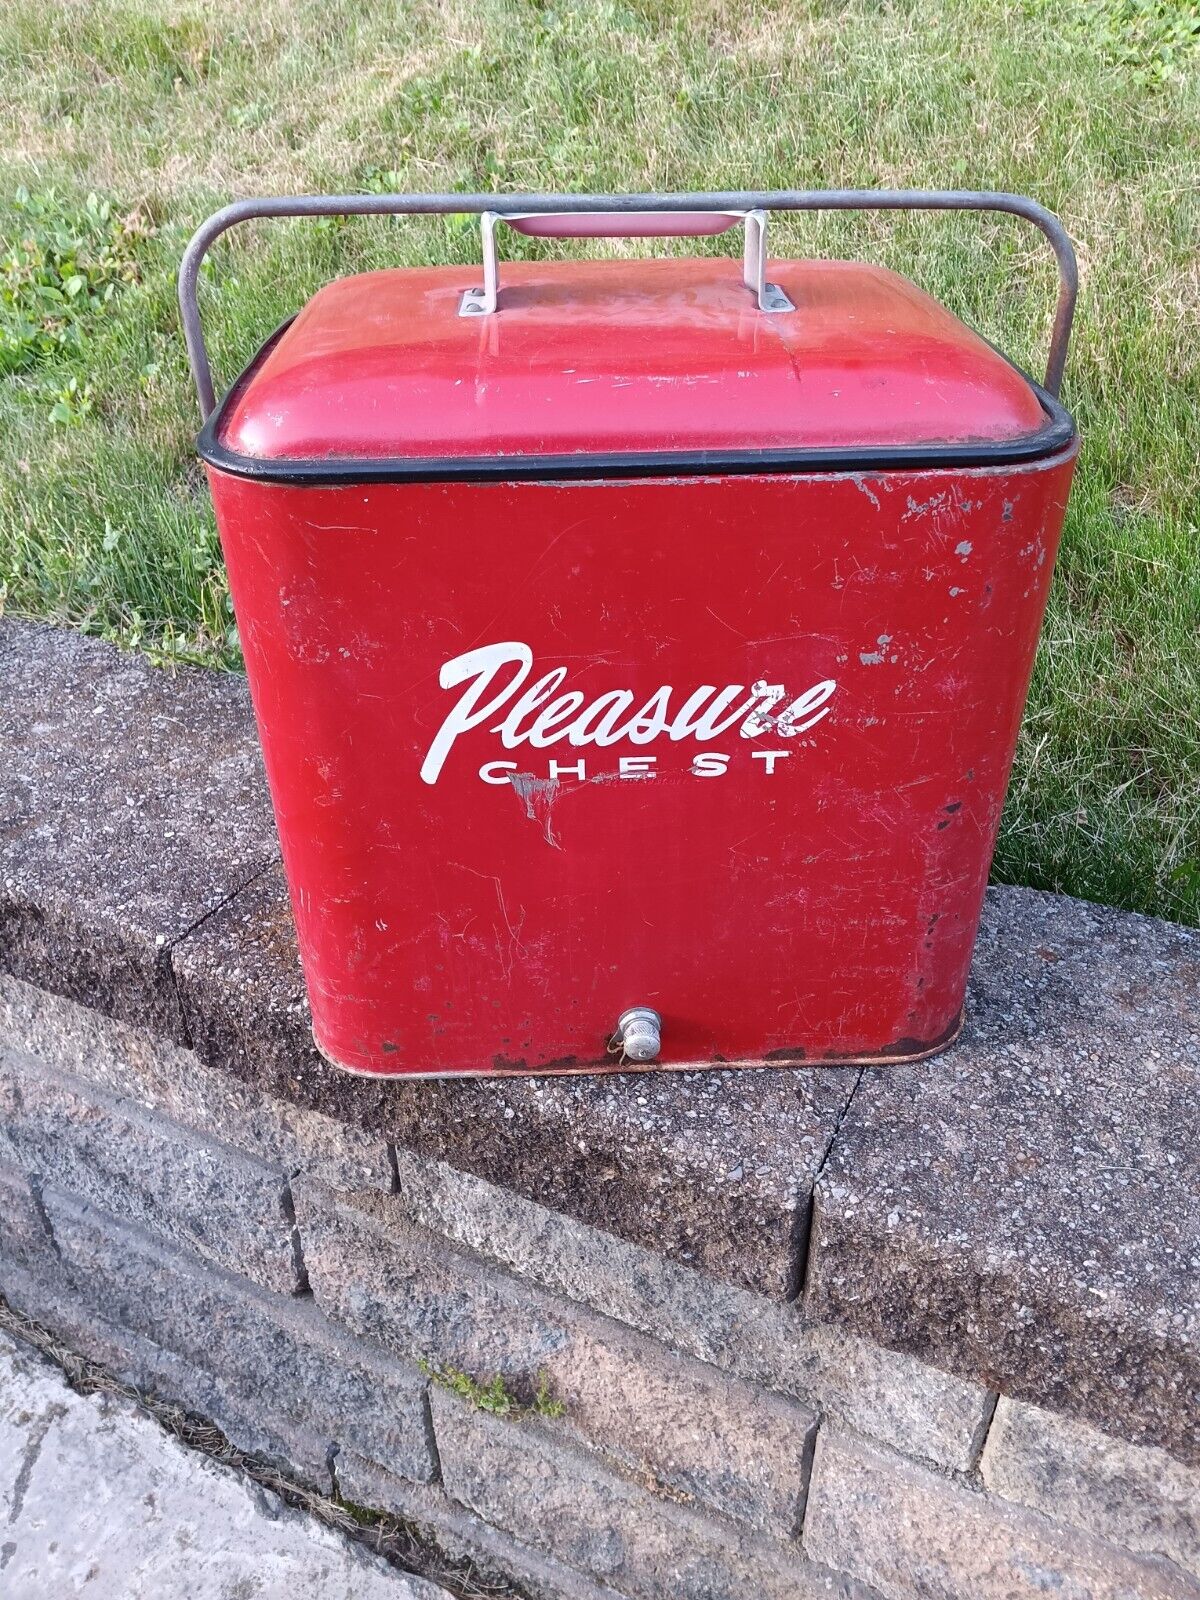 Vintage 1950s Original PLEASURE CHEST Cooler Buddy Coke Red Ice Chest Tested